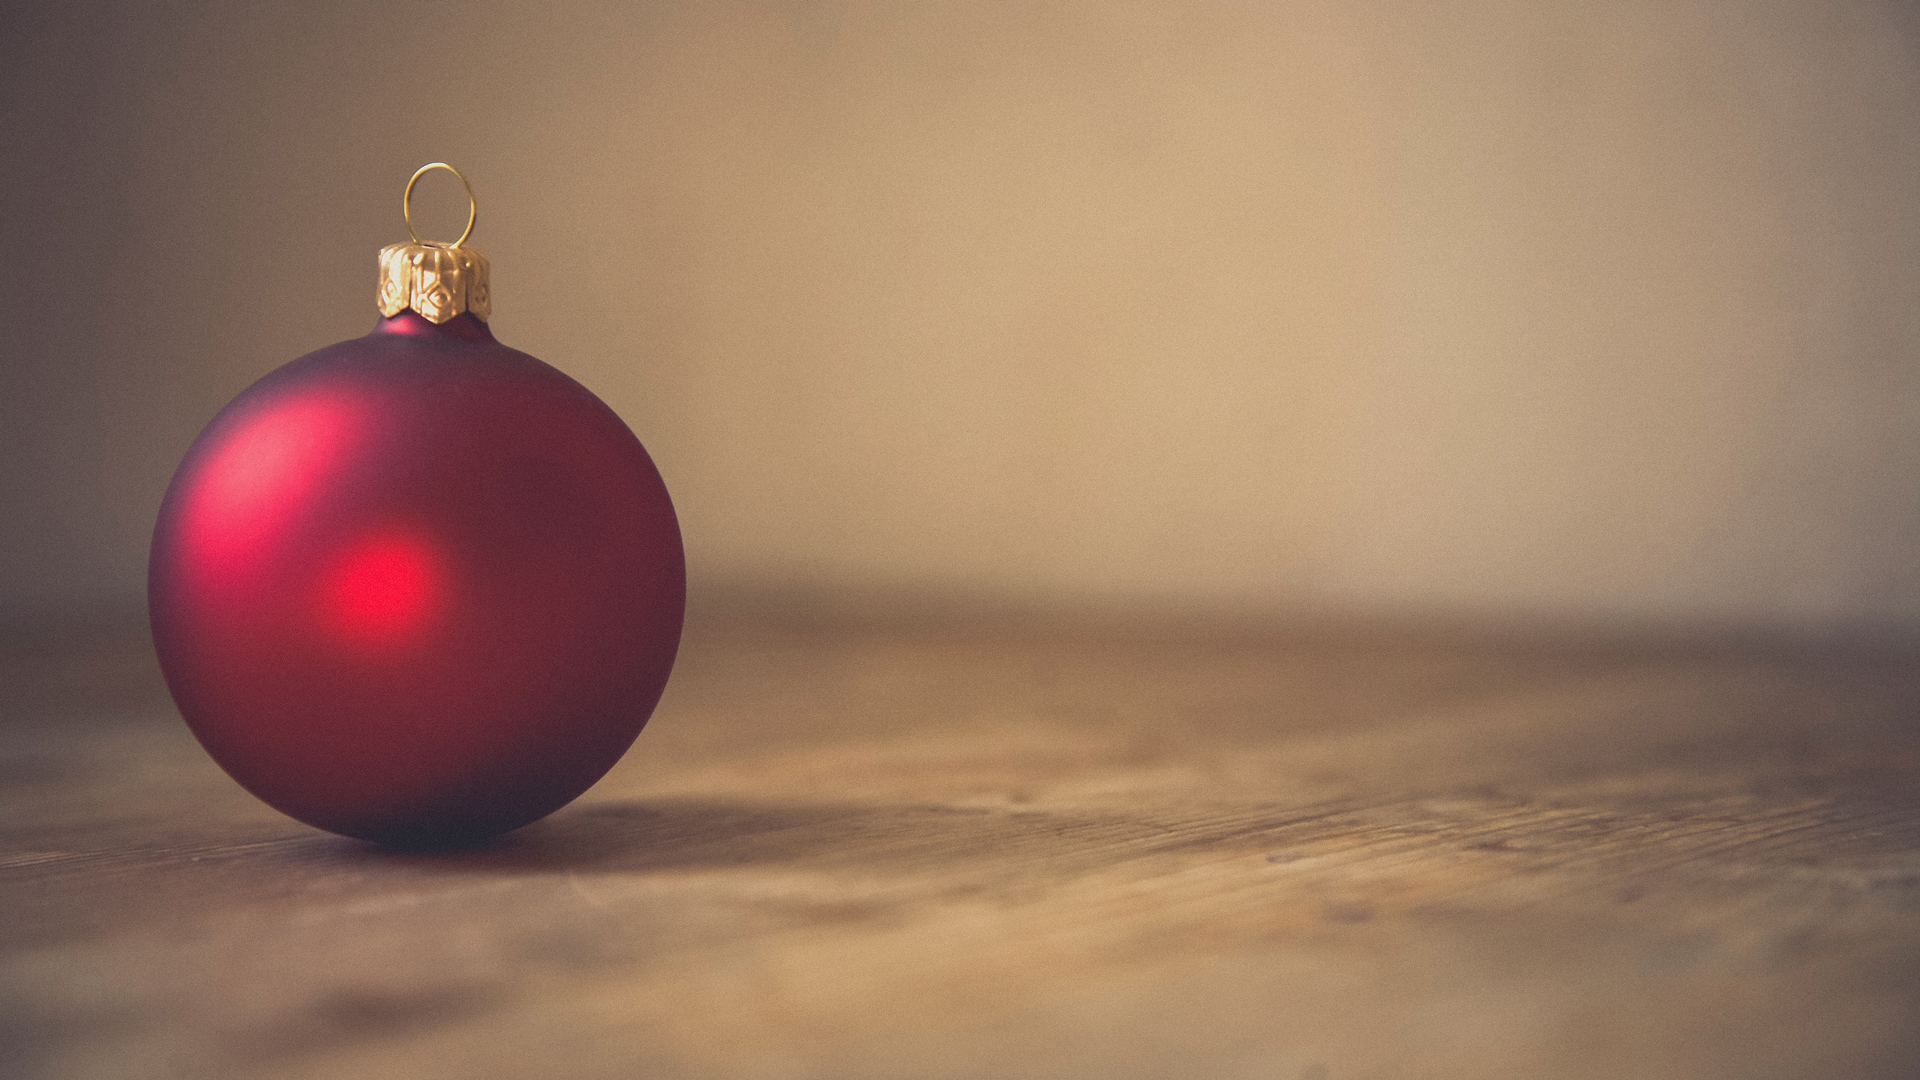 5 Things to check on your website before Christmas